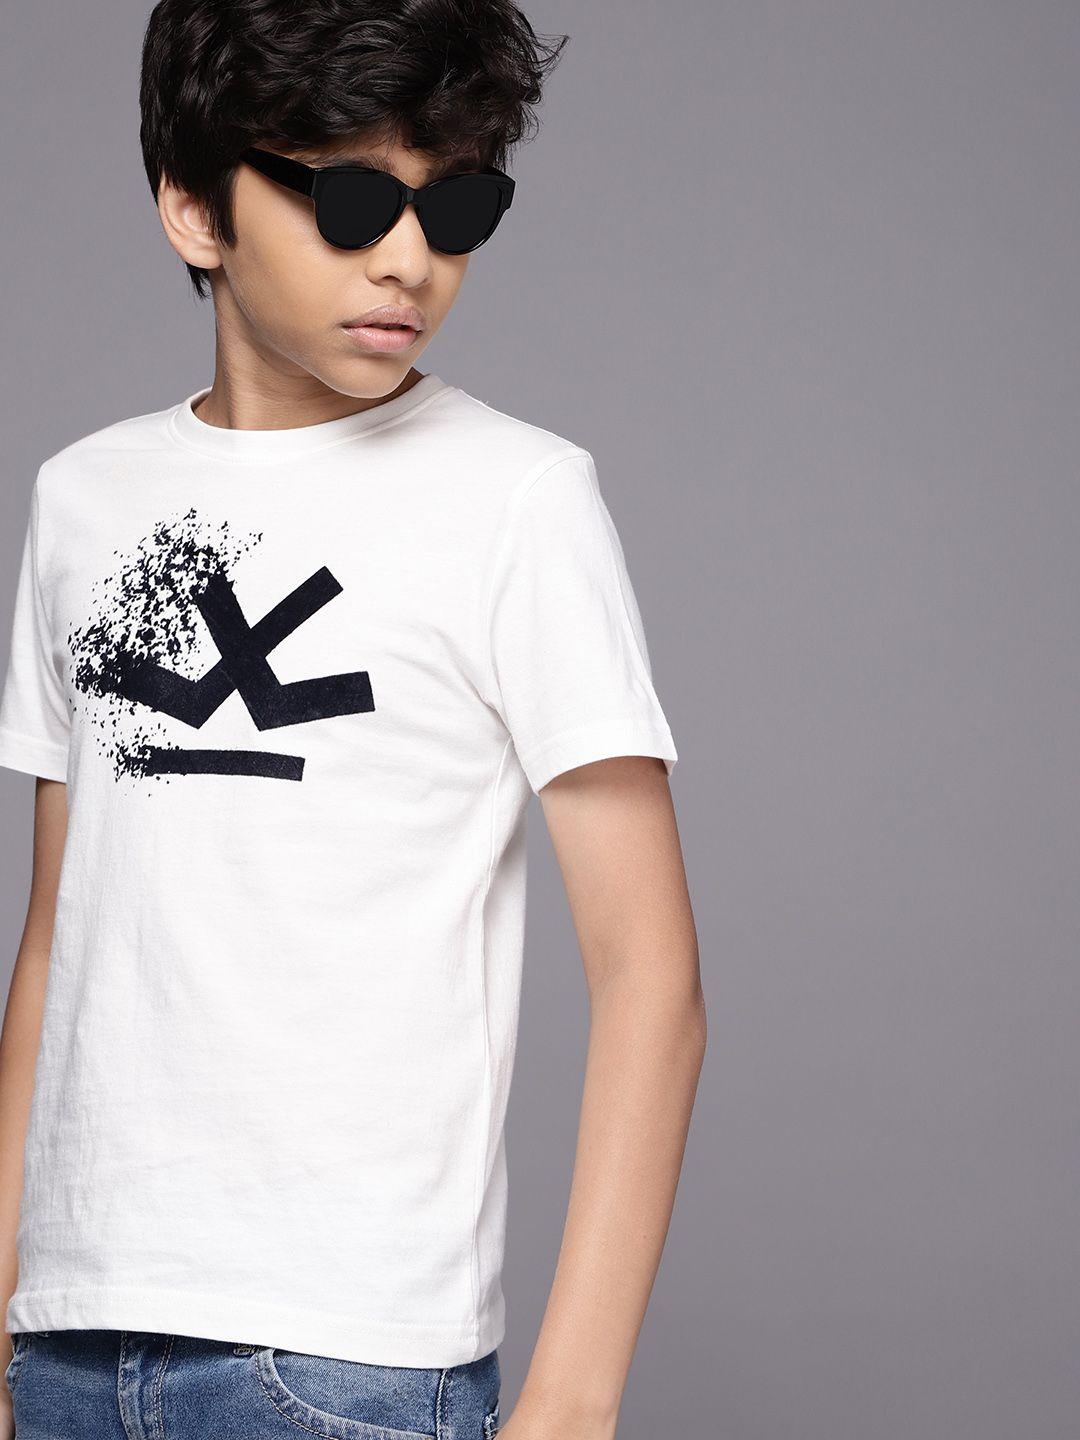 wrogn youth boys white printed pure cotton t-shirt